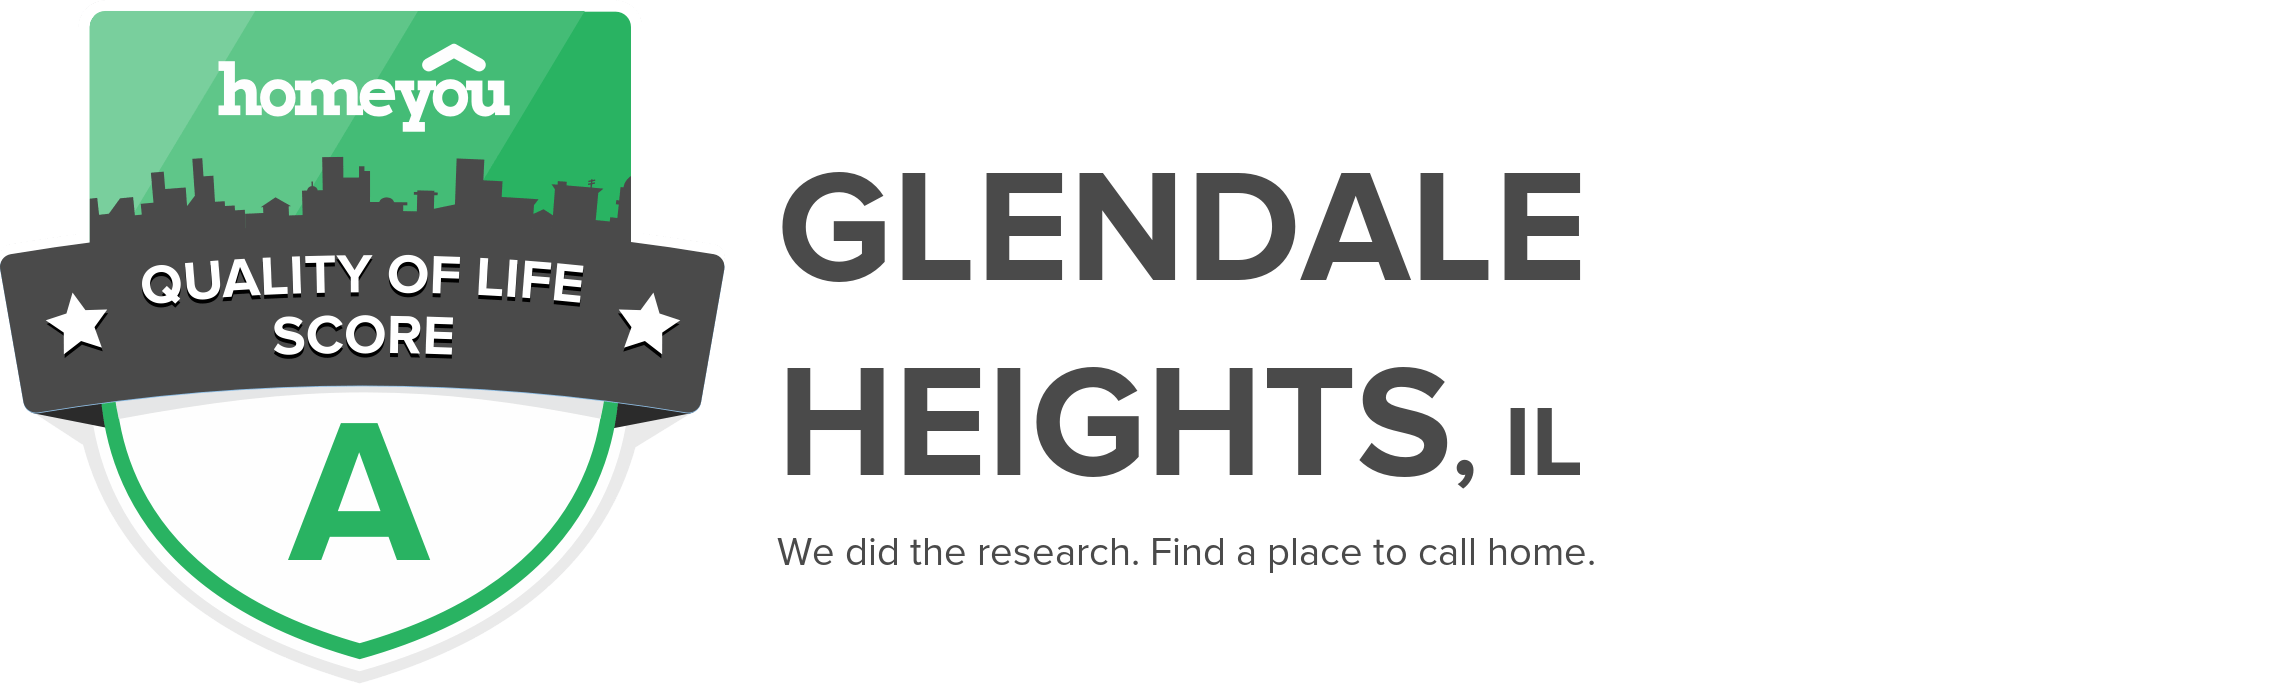 Glendale Heights, IL